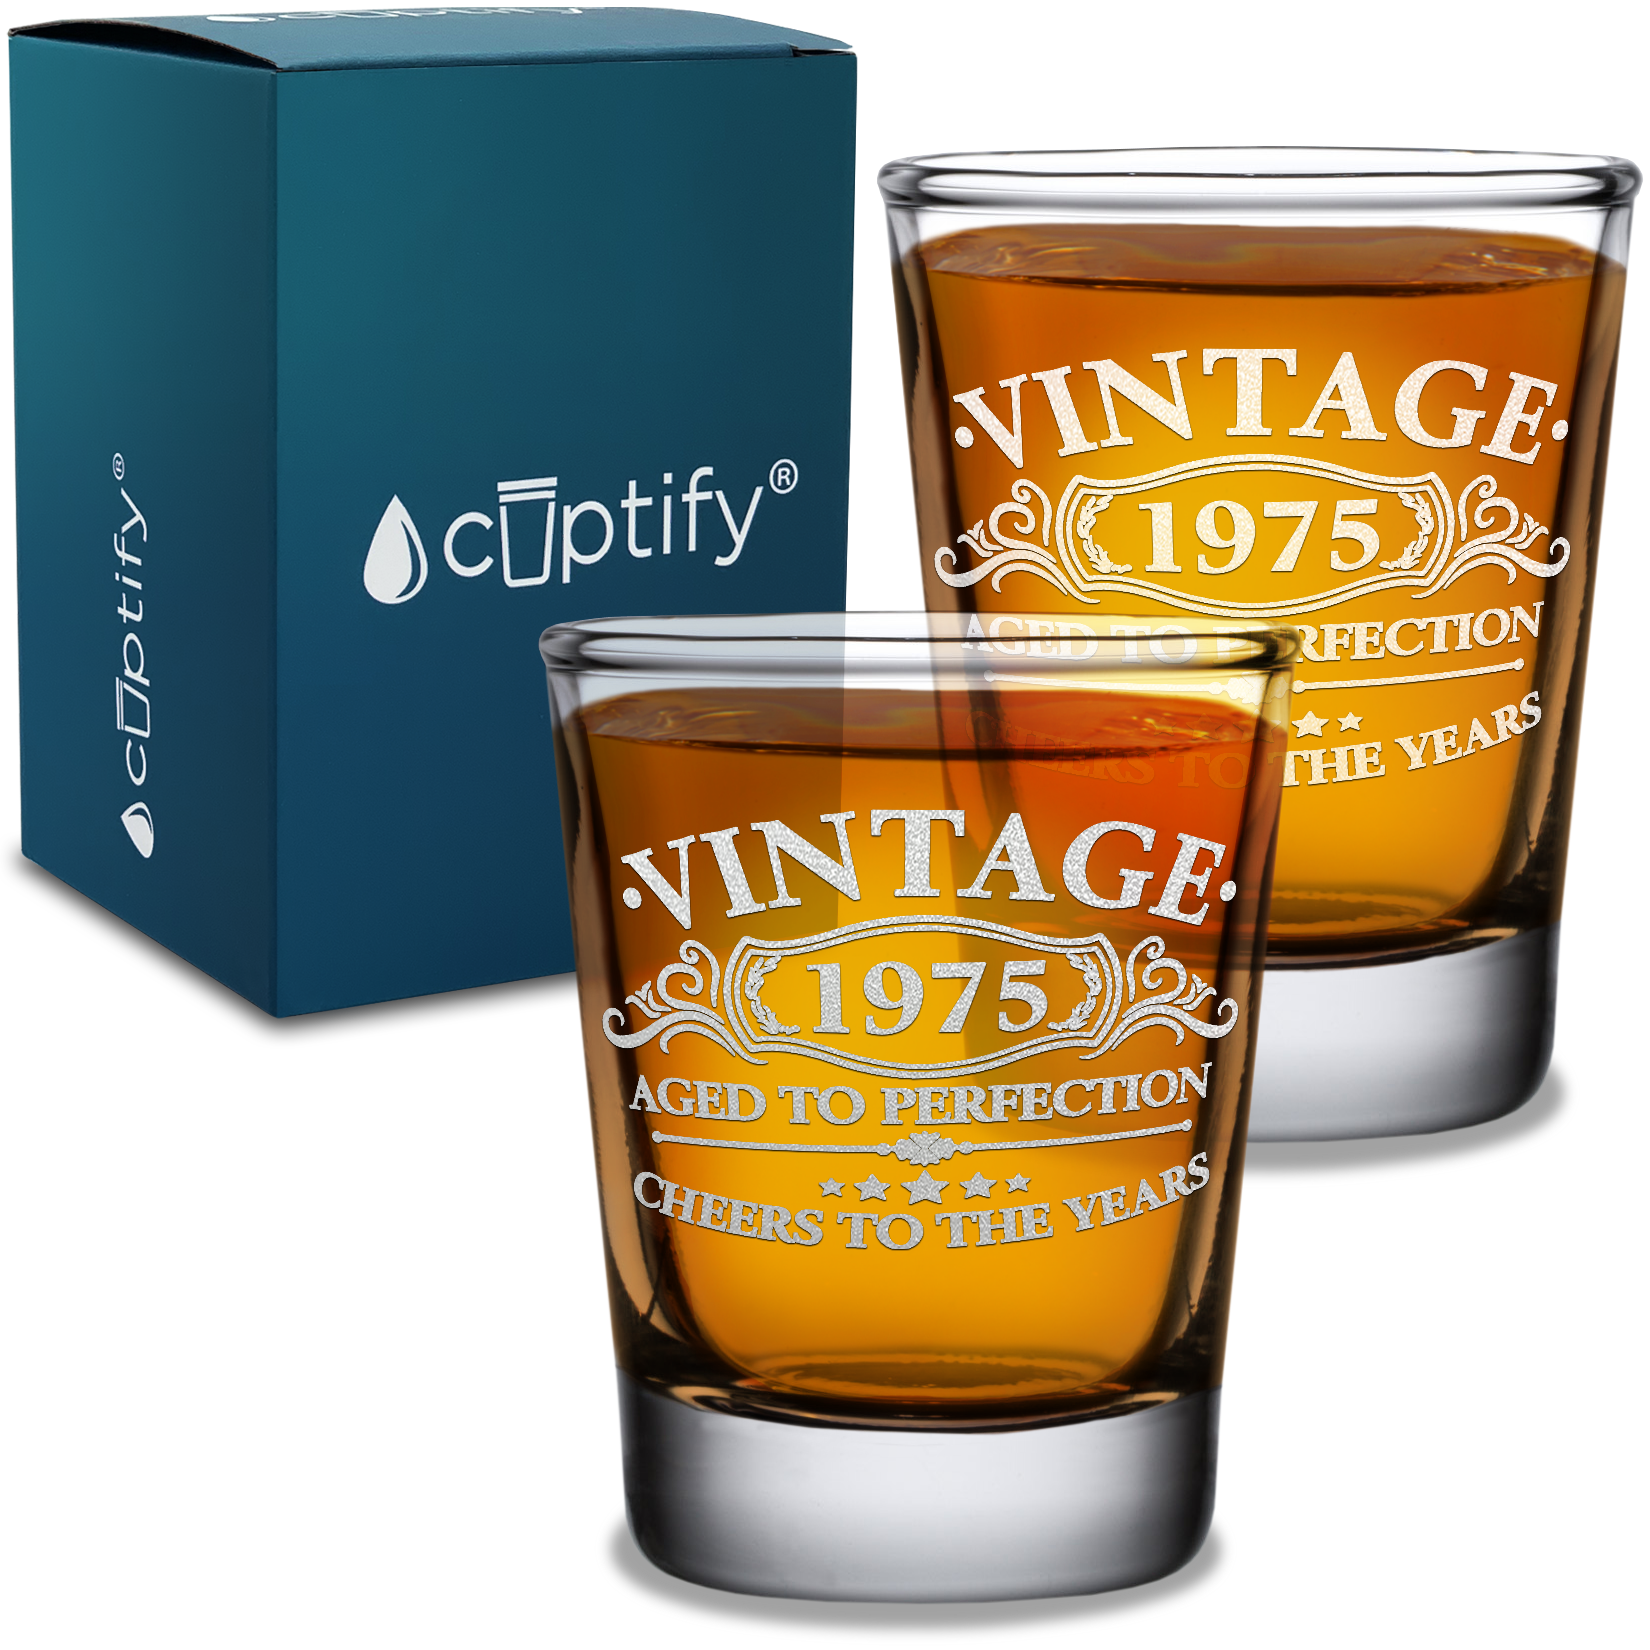 46th Birthday Gift Vintage Aged To Perfection Cheers To 46 Years 1975 Laser Engraved on 2oz Shot Glasses - Set of 2